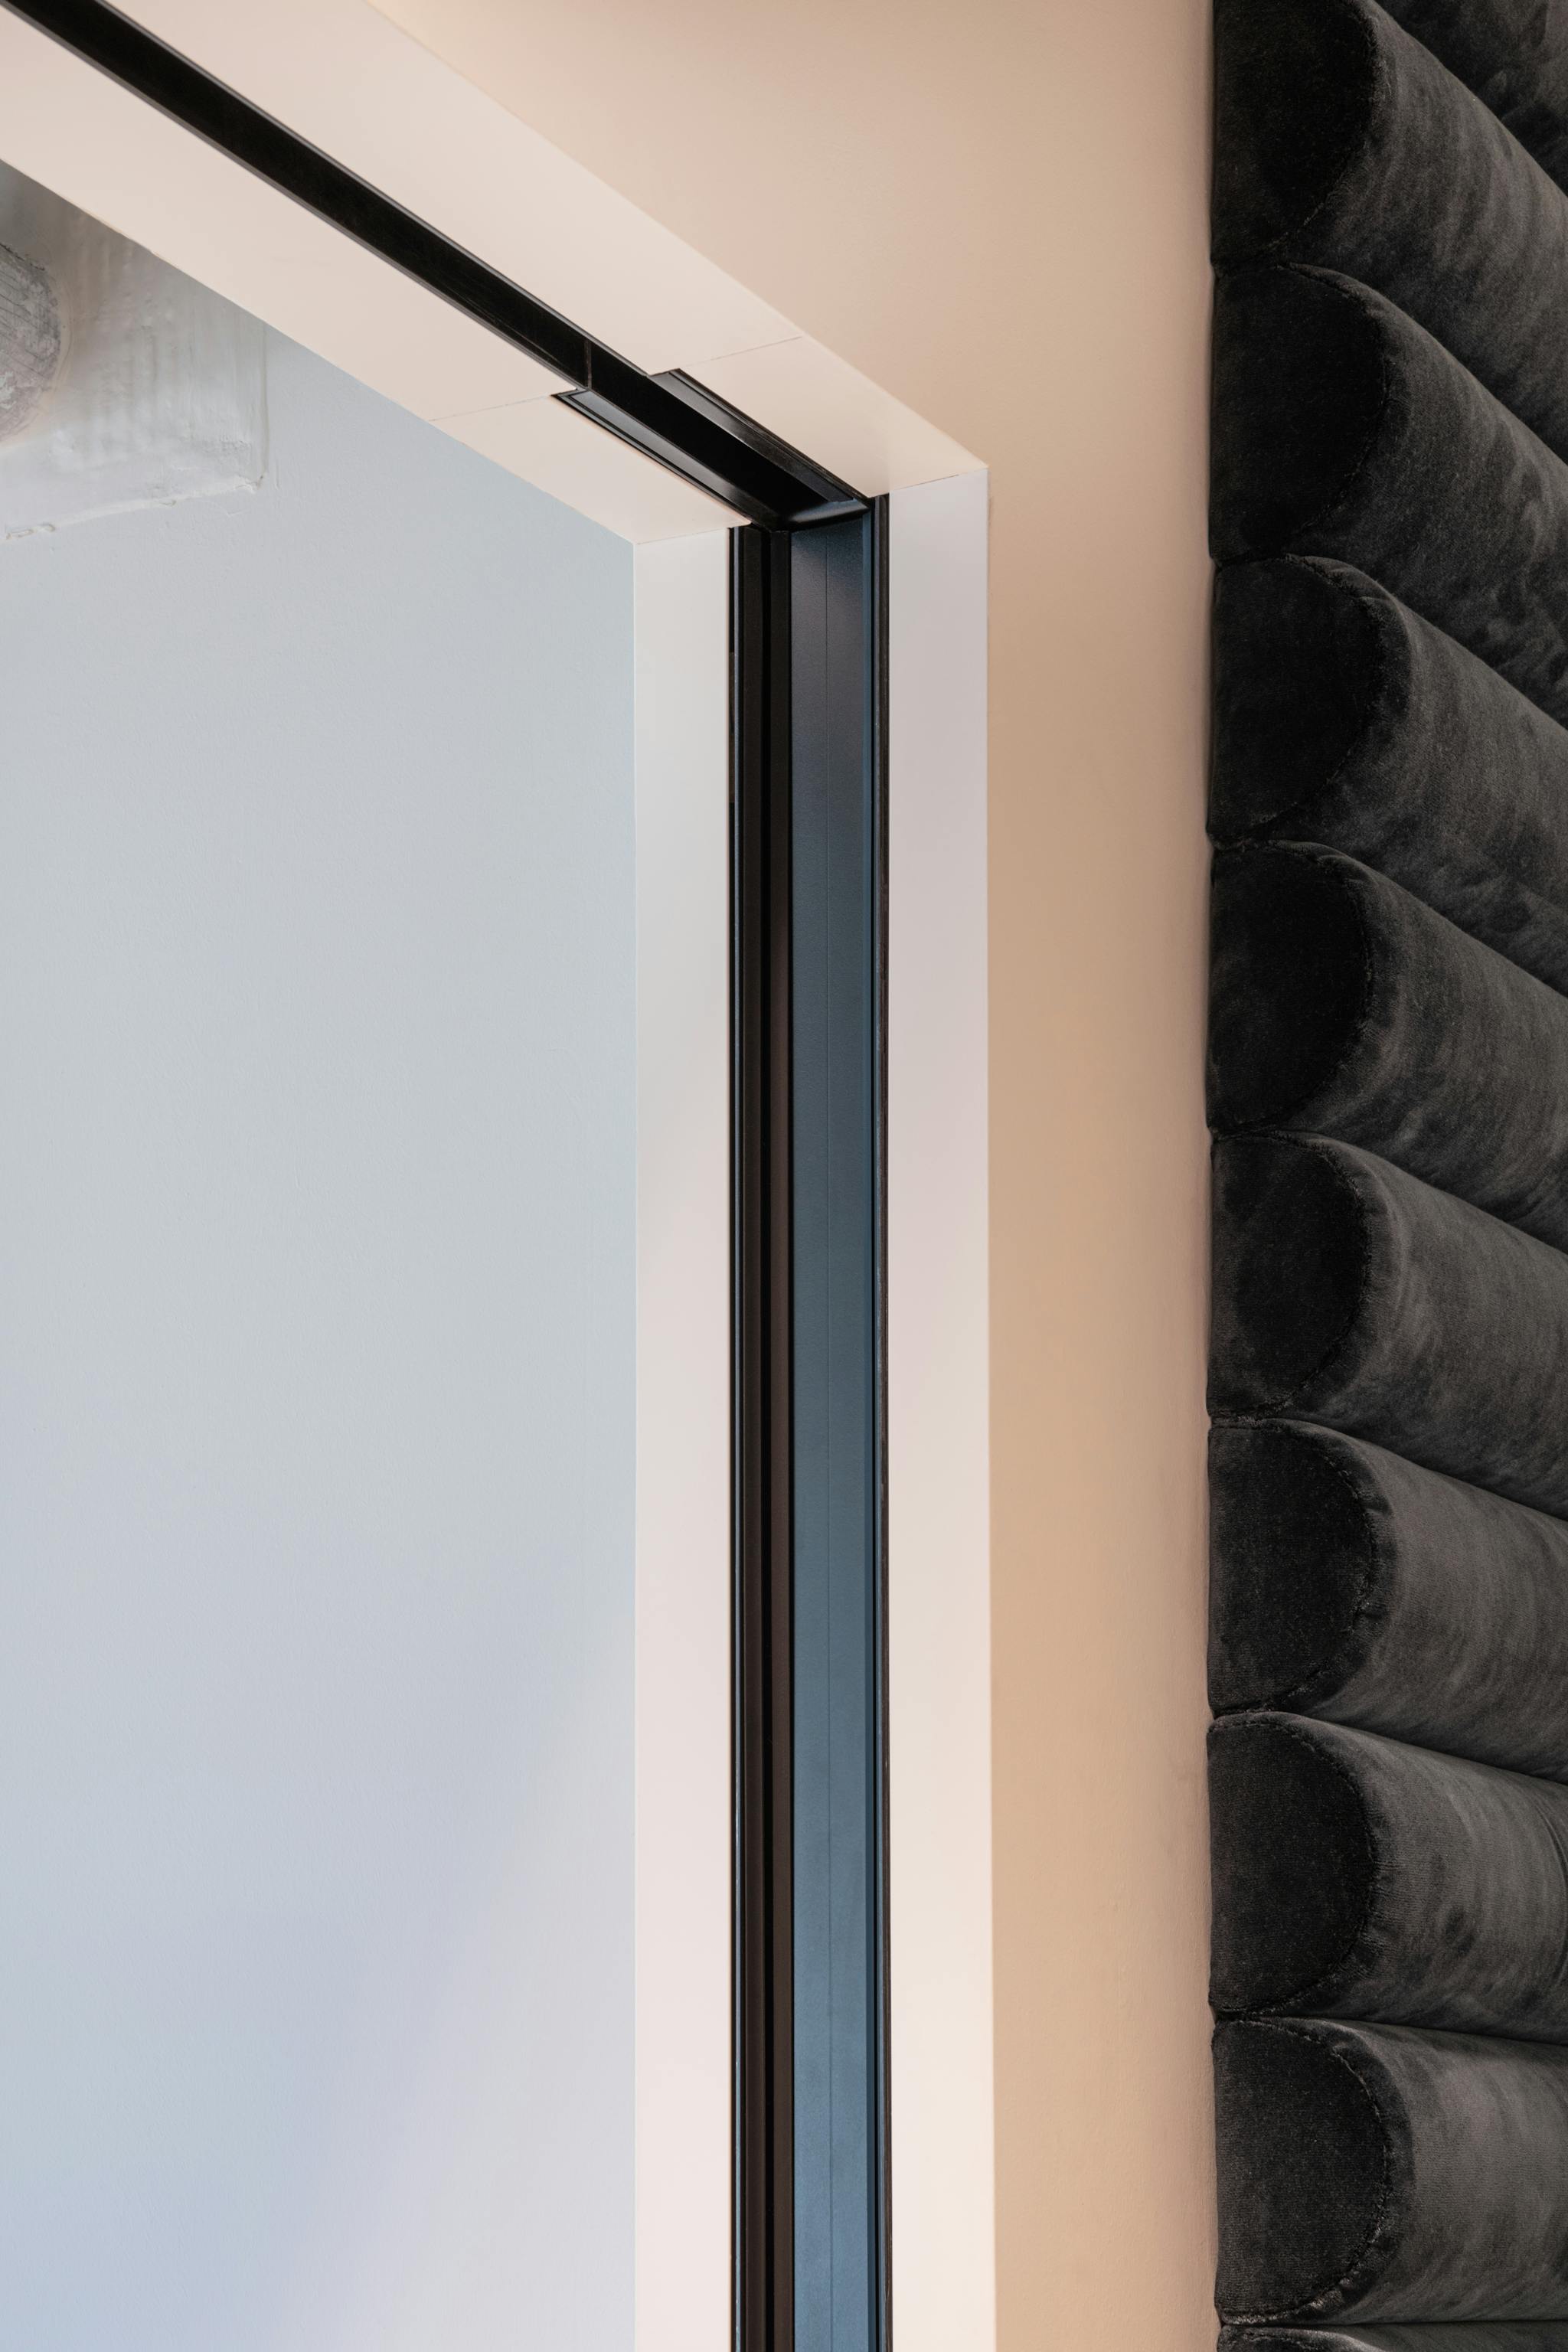 Black track detail of a sliding pocket door in a white wall with dark cushioned wall feature to the right.